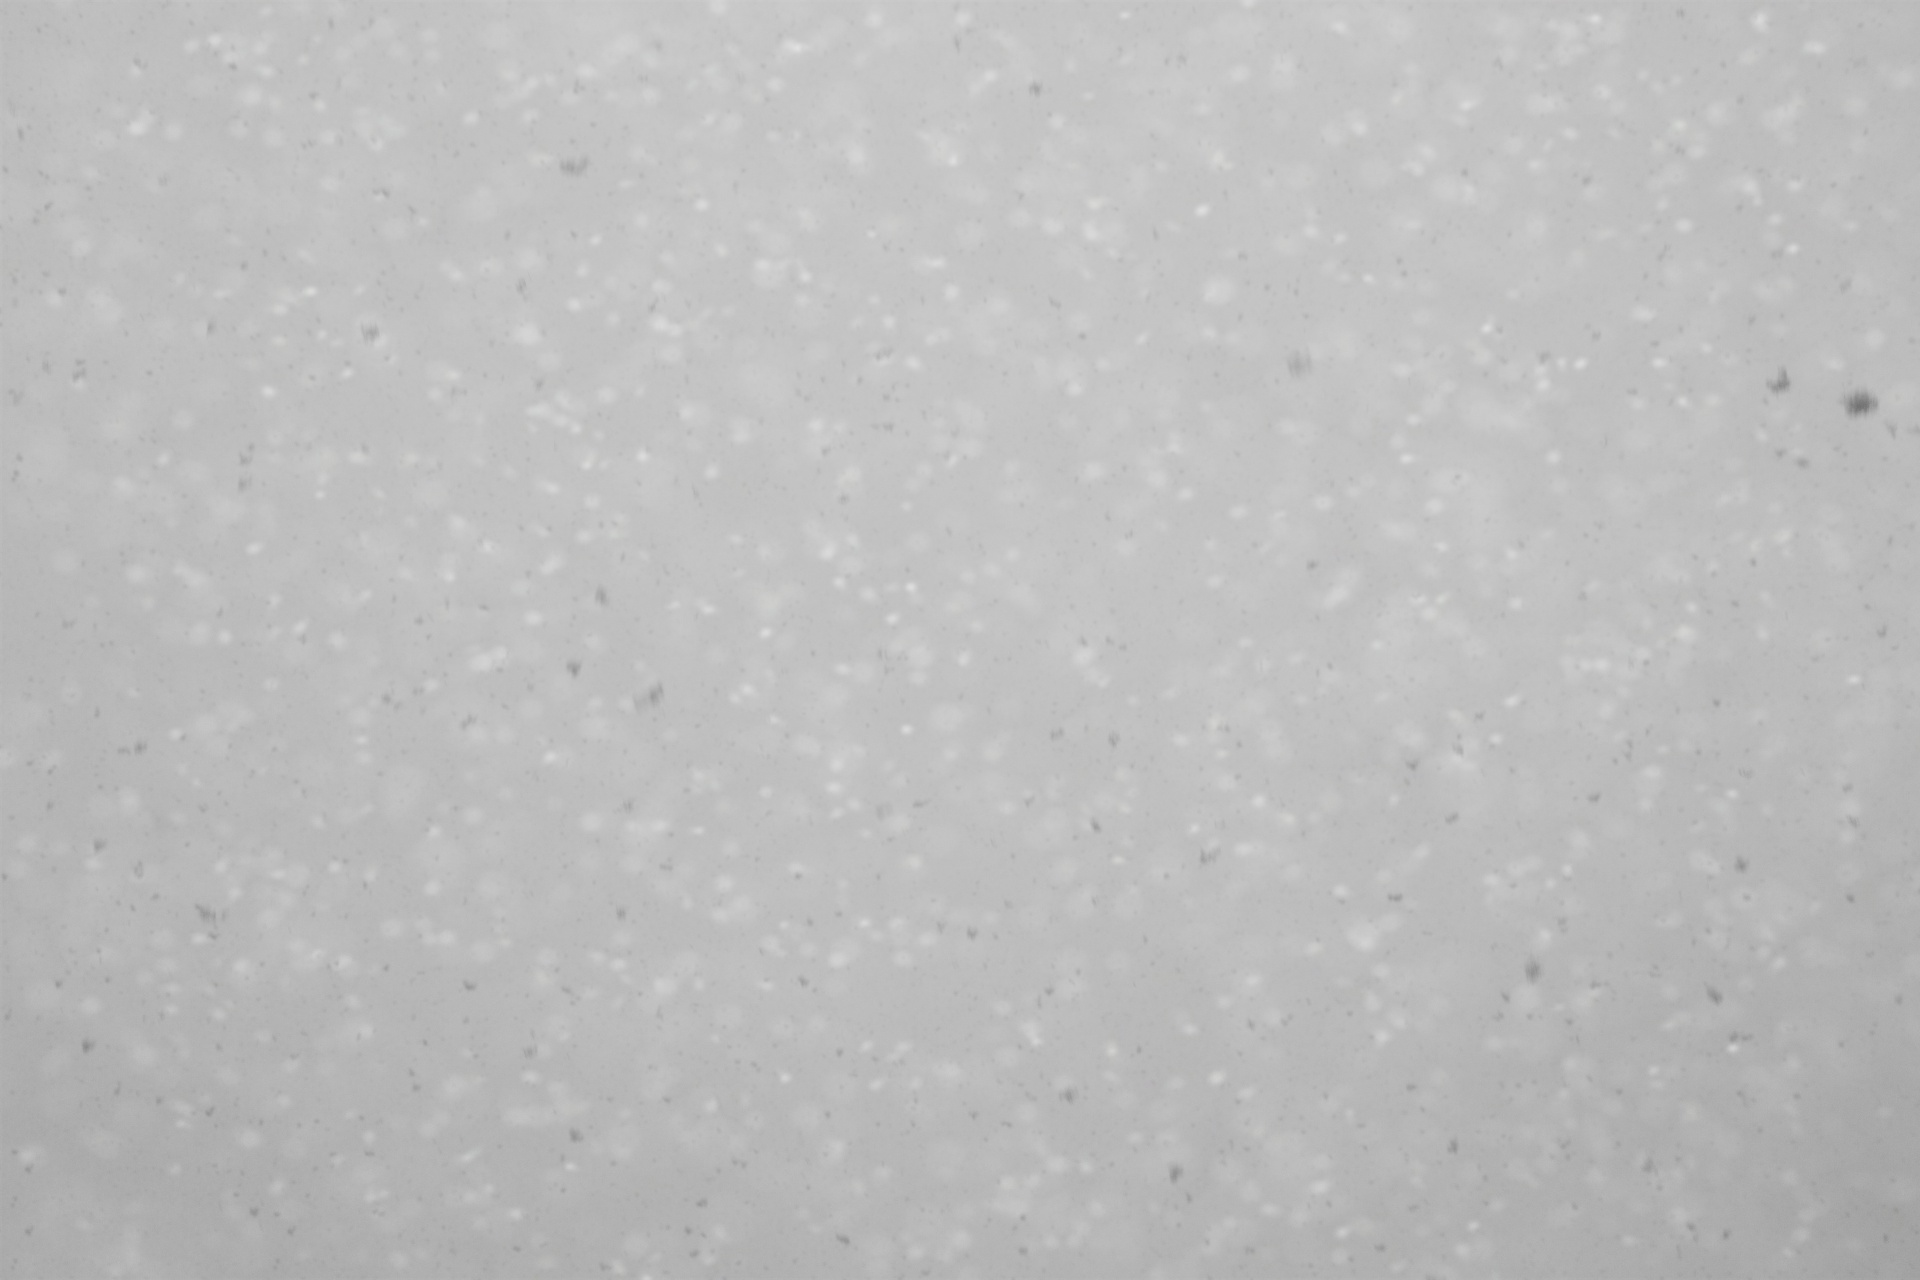 snow backgrounds snowing free photo